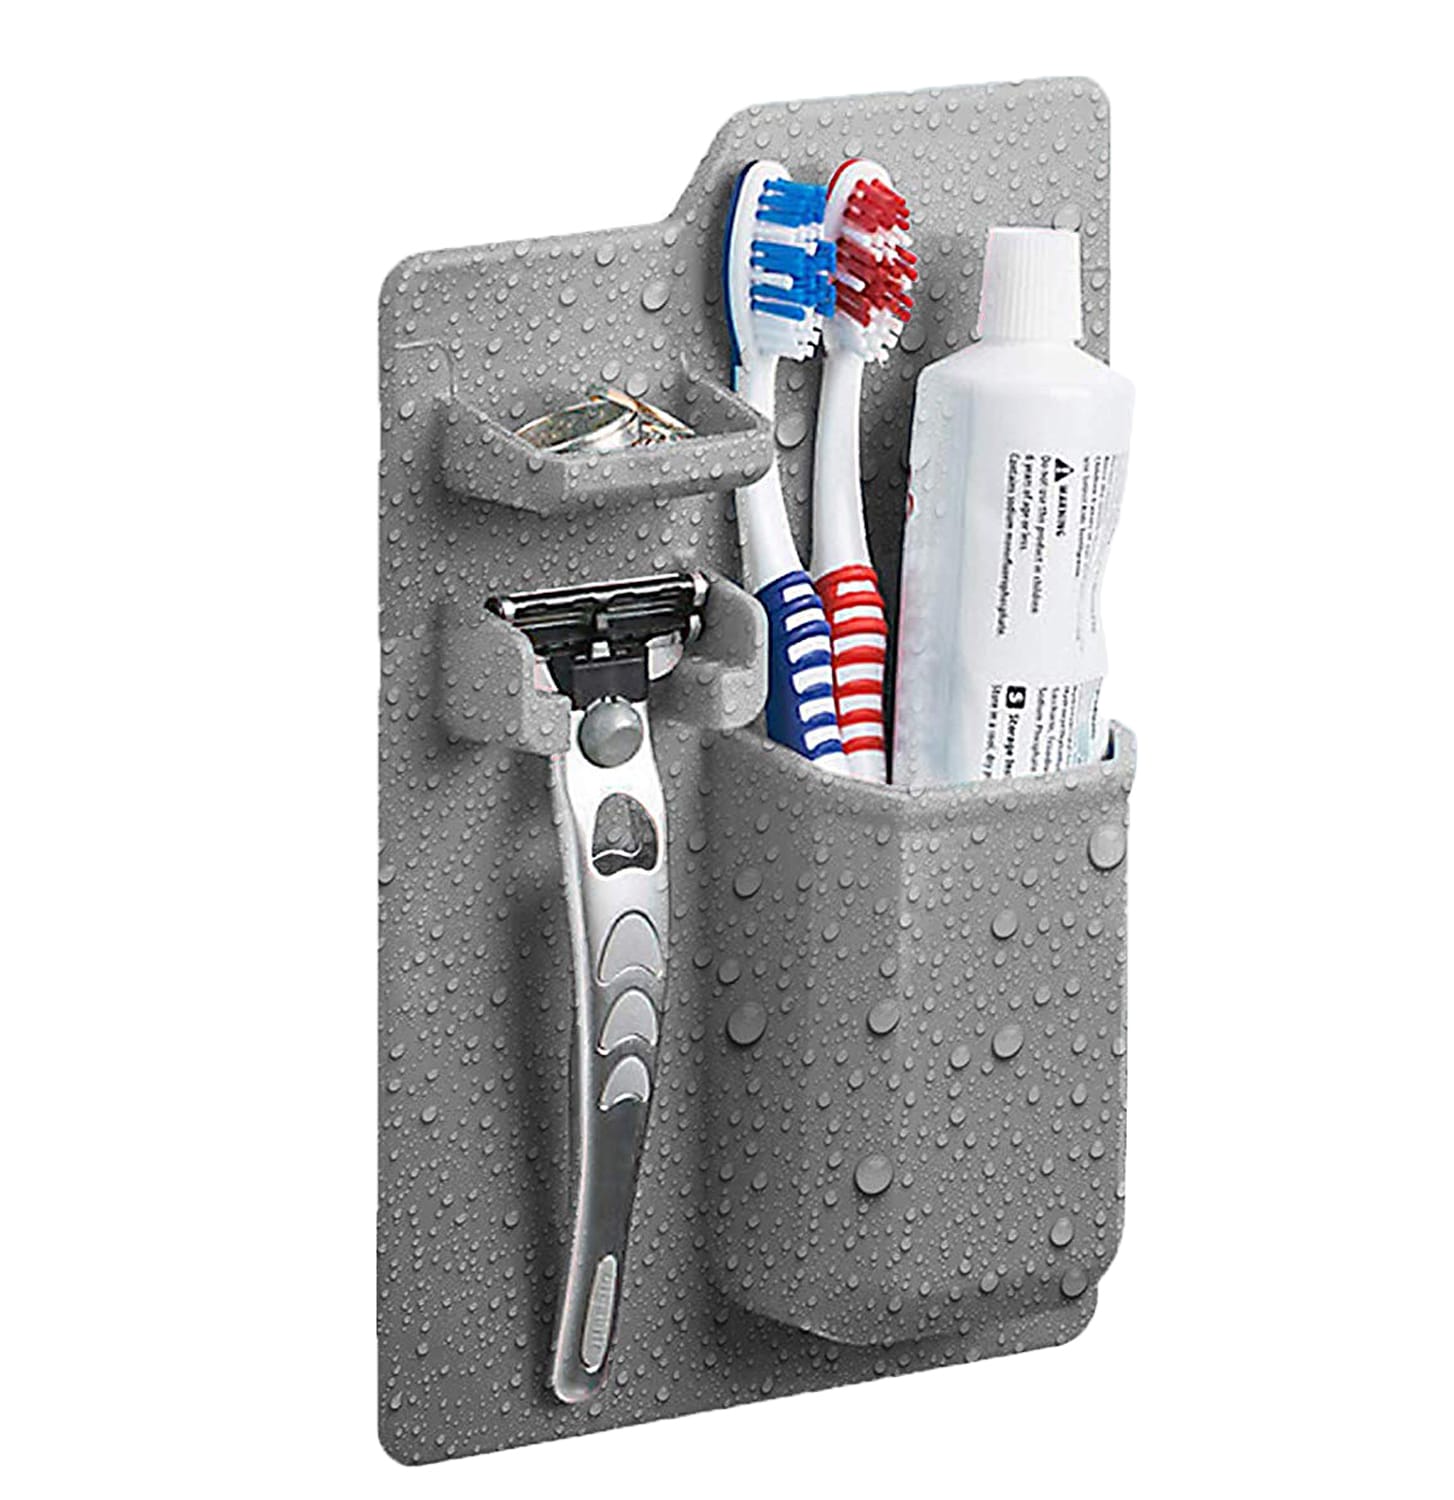 Wall Mount Holder Self-adhesive Tooth Brush Box Bathroom Accessories LP 